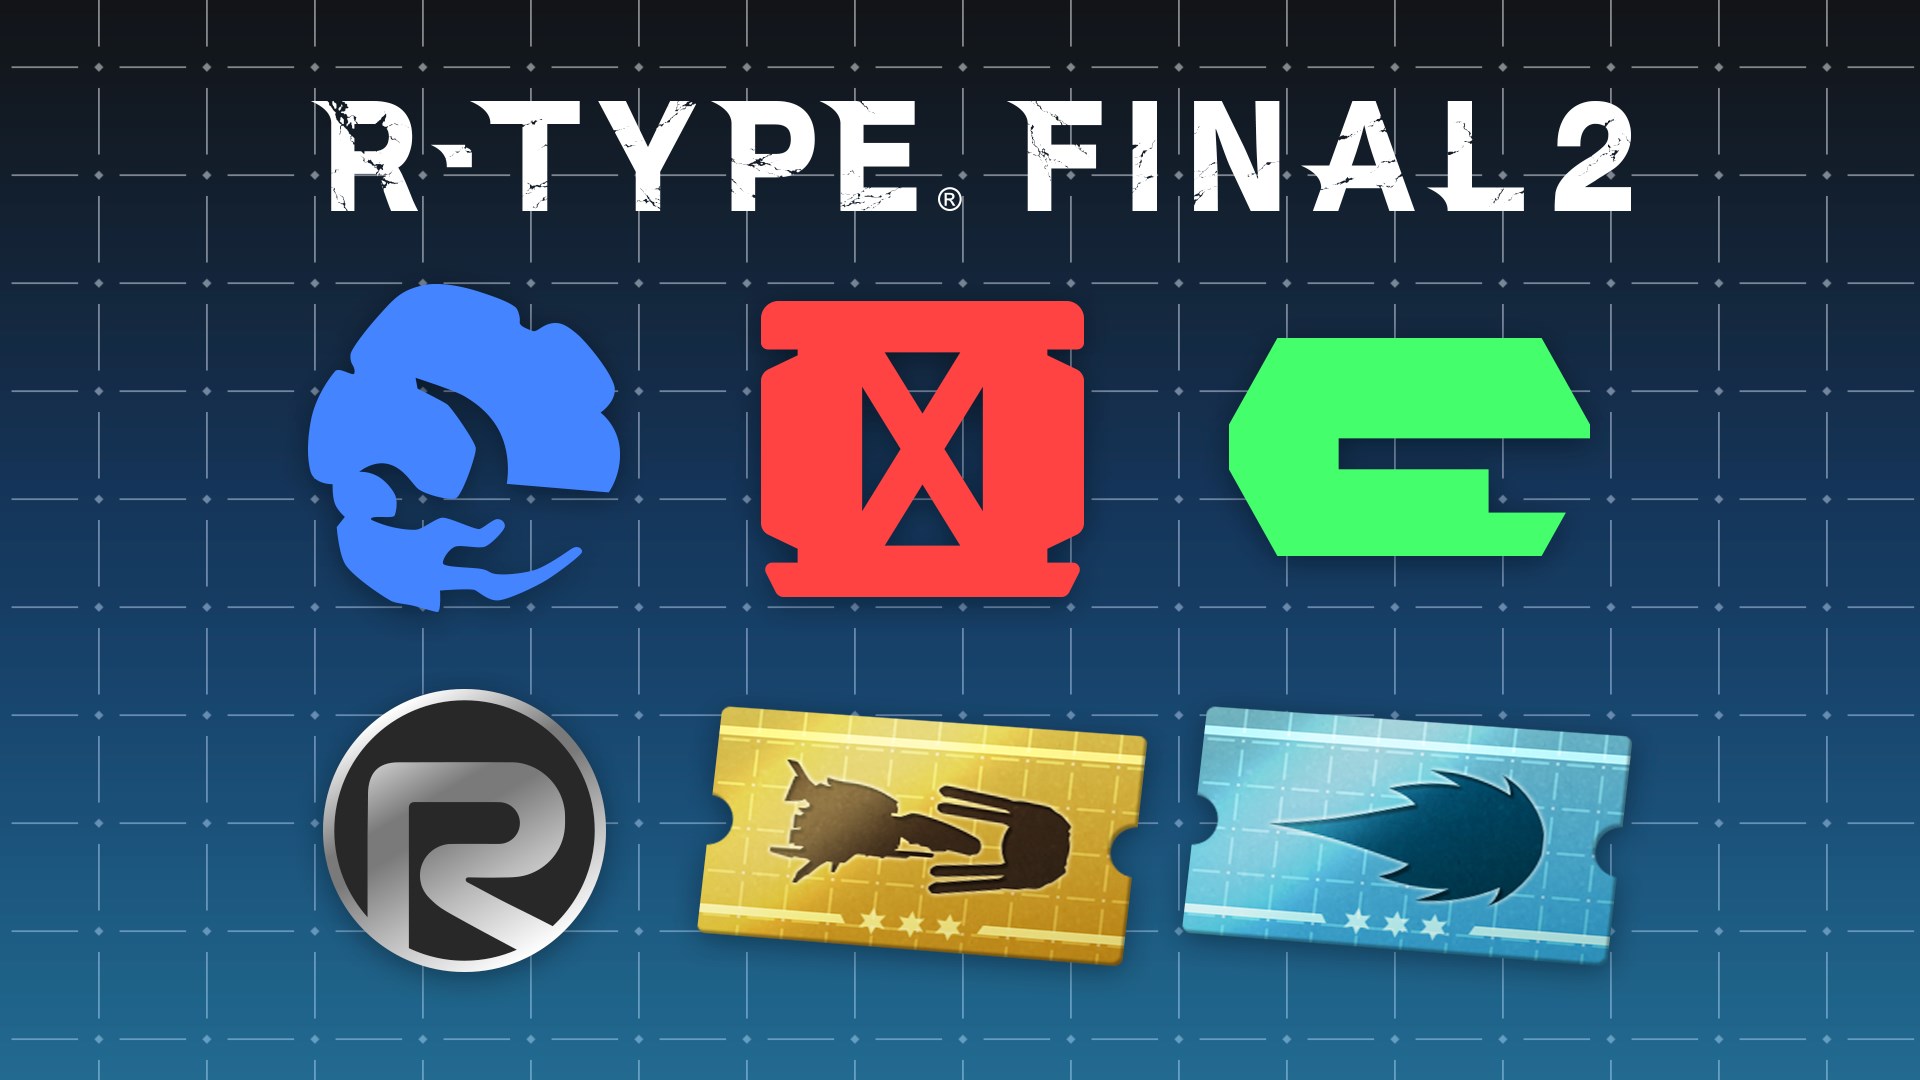 R-Type Final 2 PC: New Pilot Support Pack